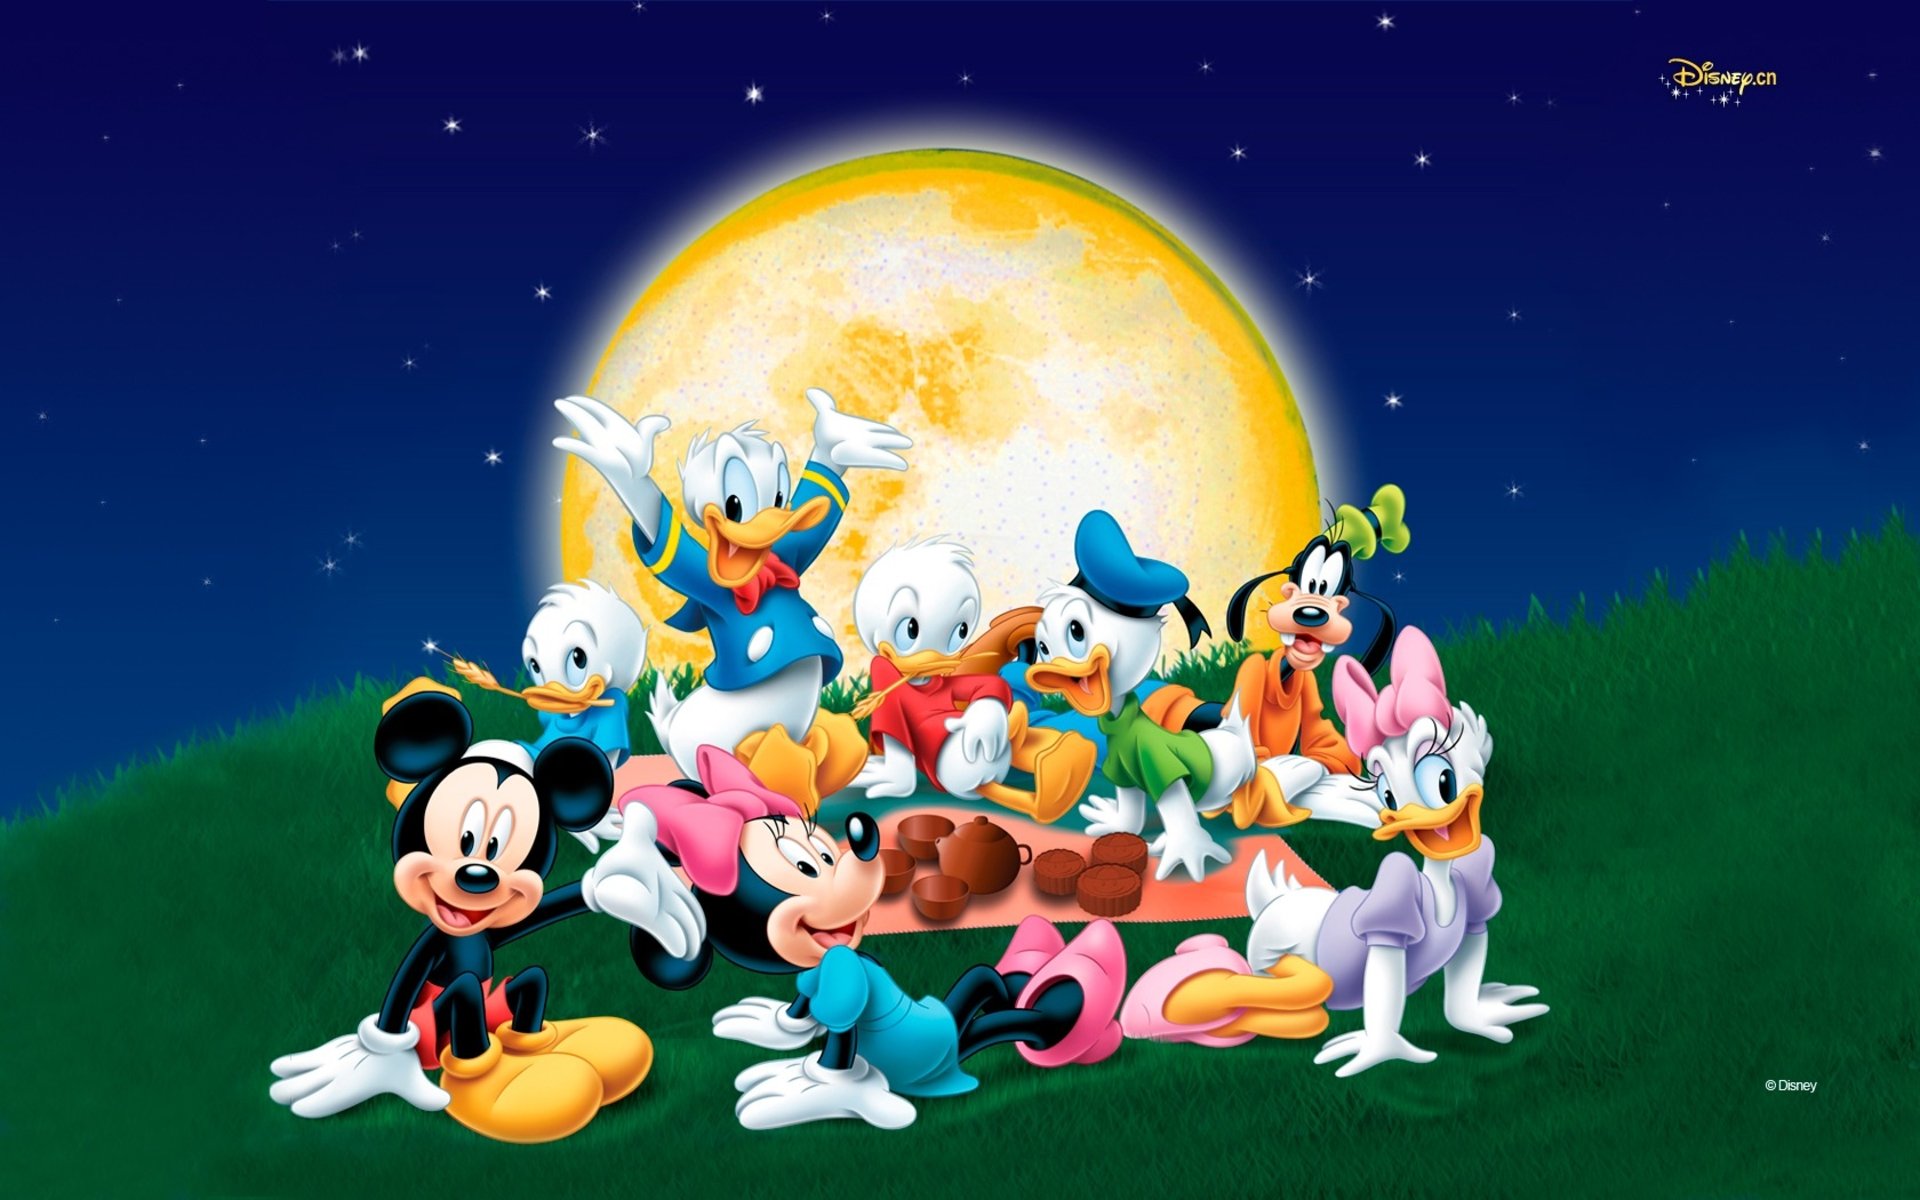 Disney Pictures Daisy Duck Hd Wallpapers For Mobile Phones 1920x1200   Wallpapers13com